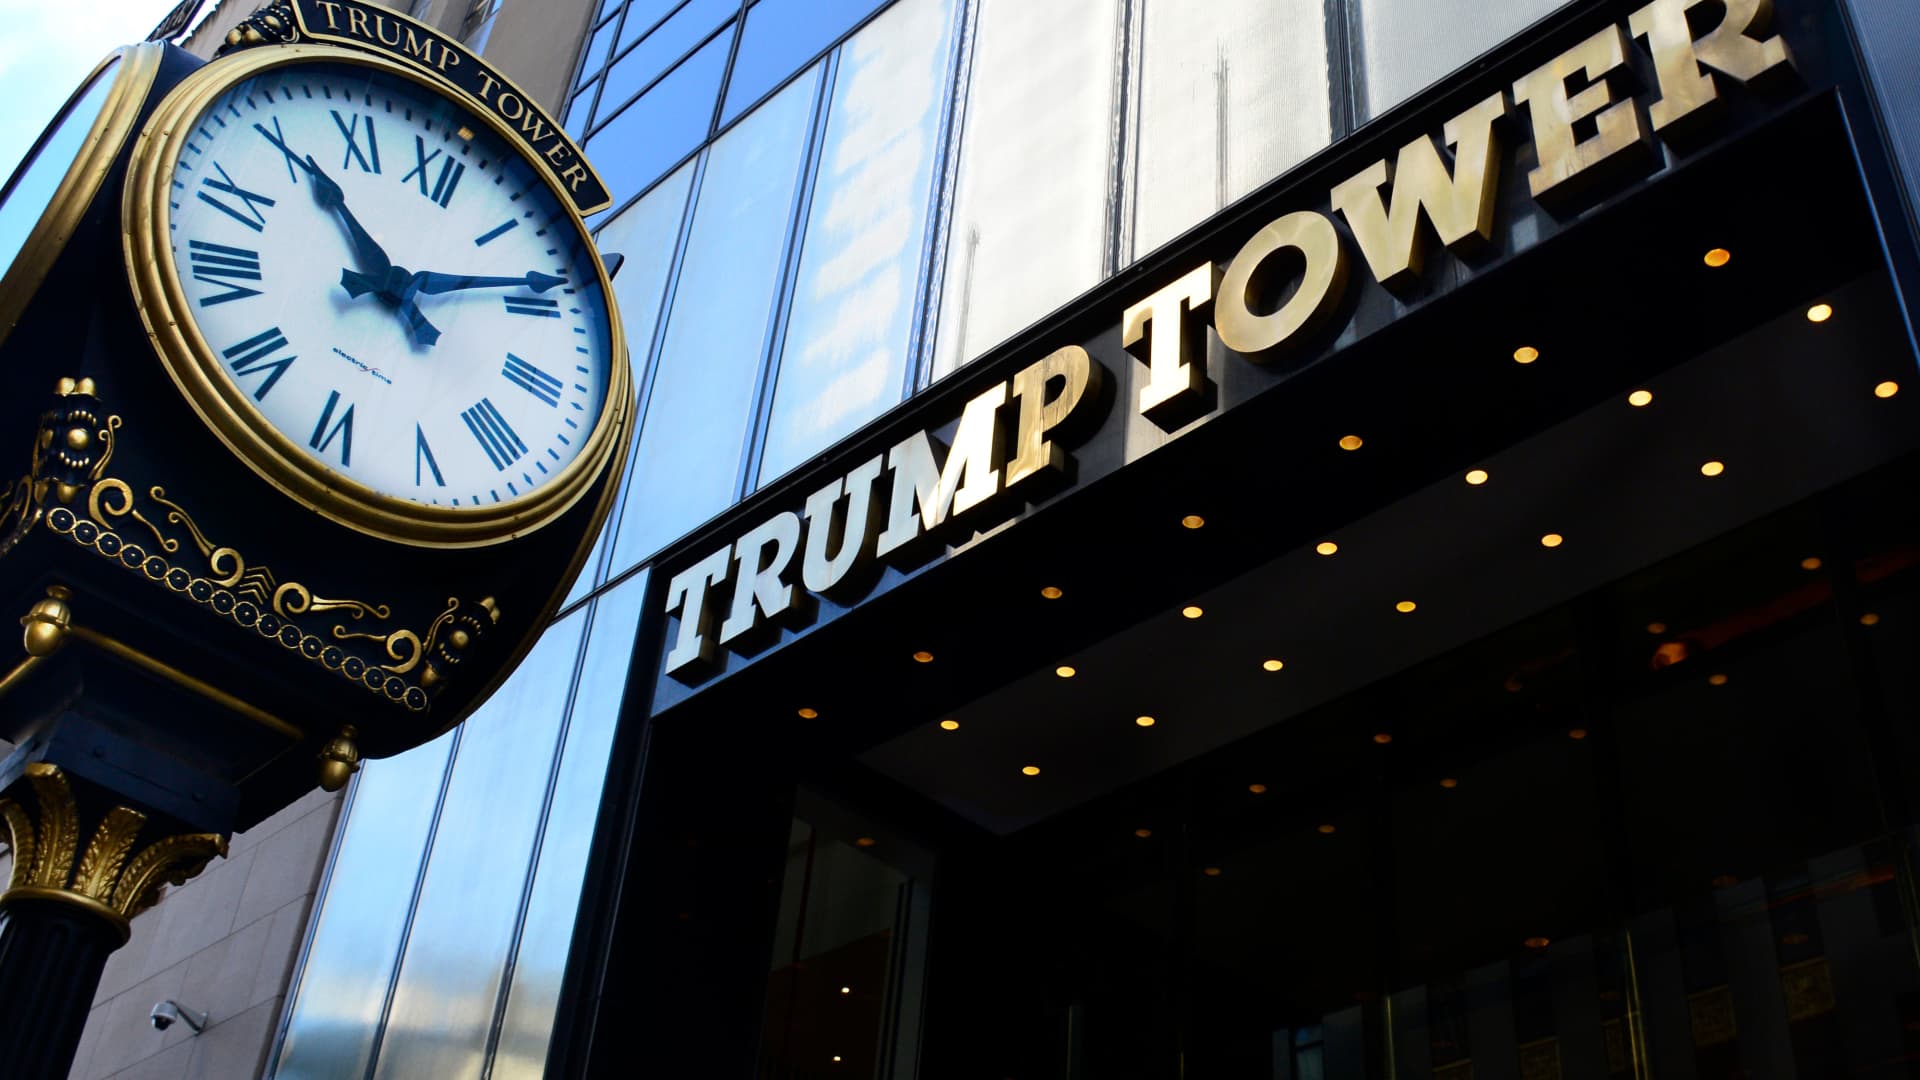 Trump Org gets independent monitor to oversee financial reporting